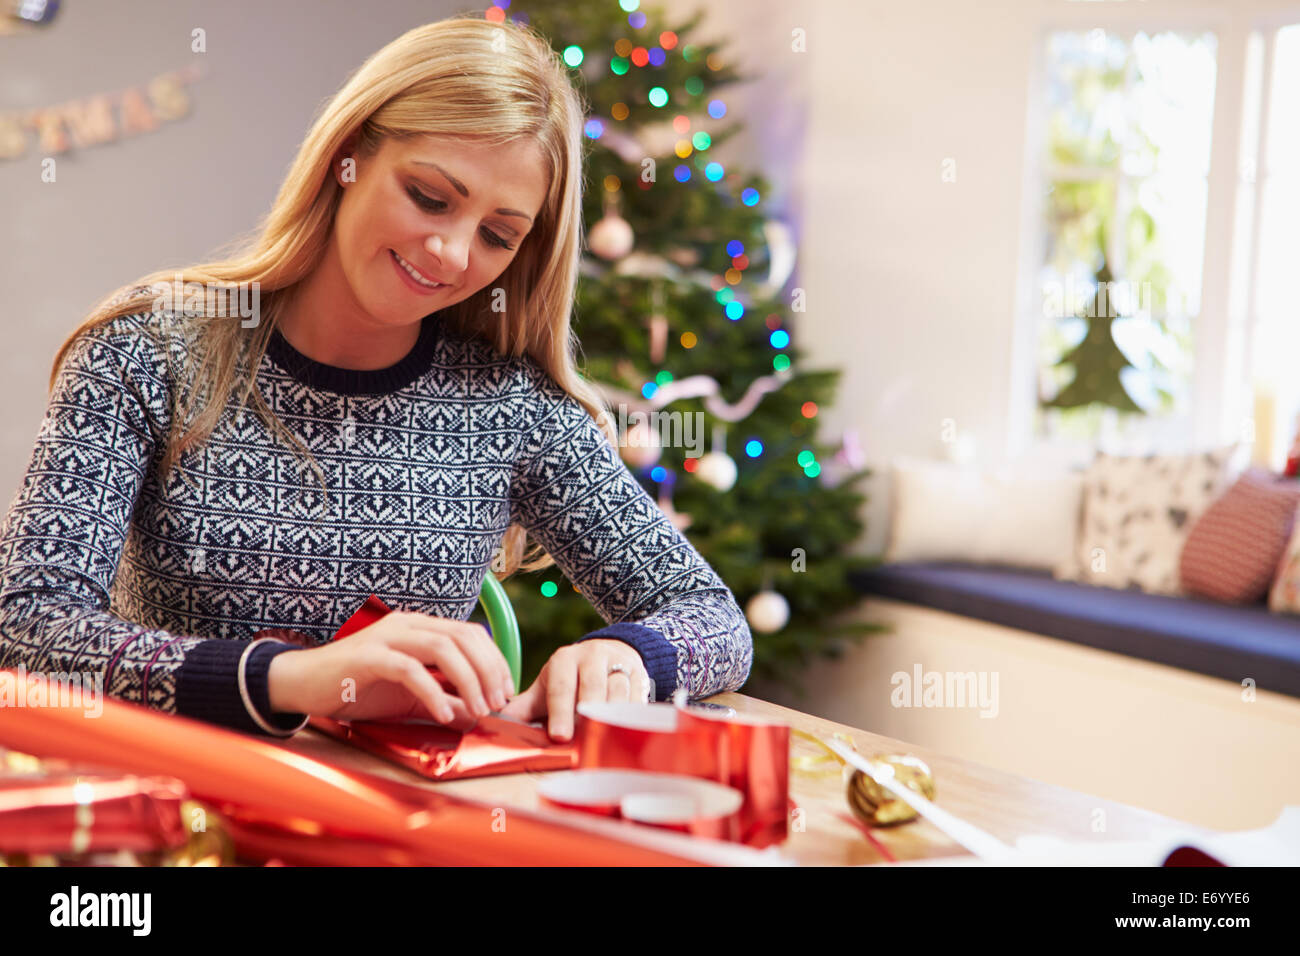 Woman Wrapping Christmas Gifts At Home Stock Photo